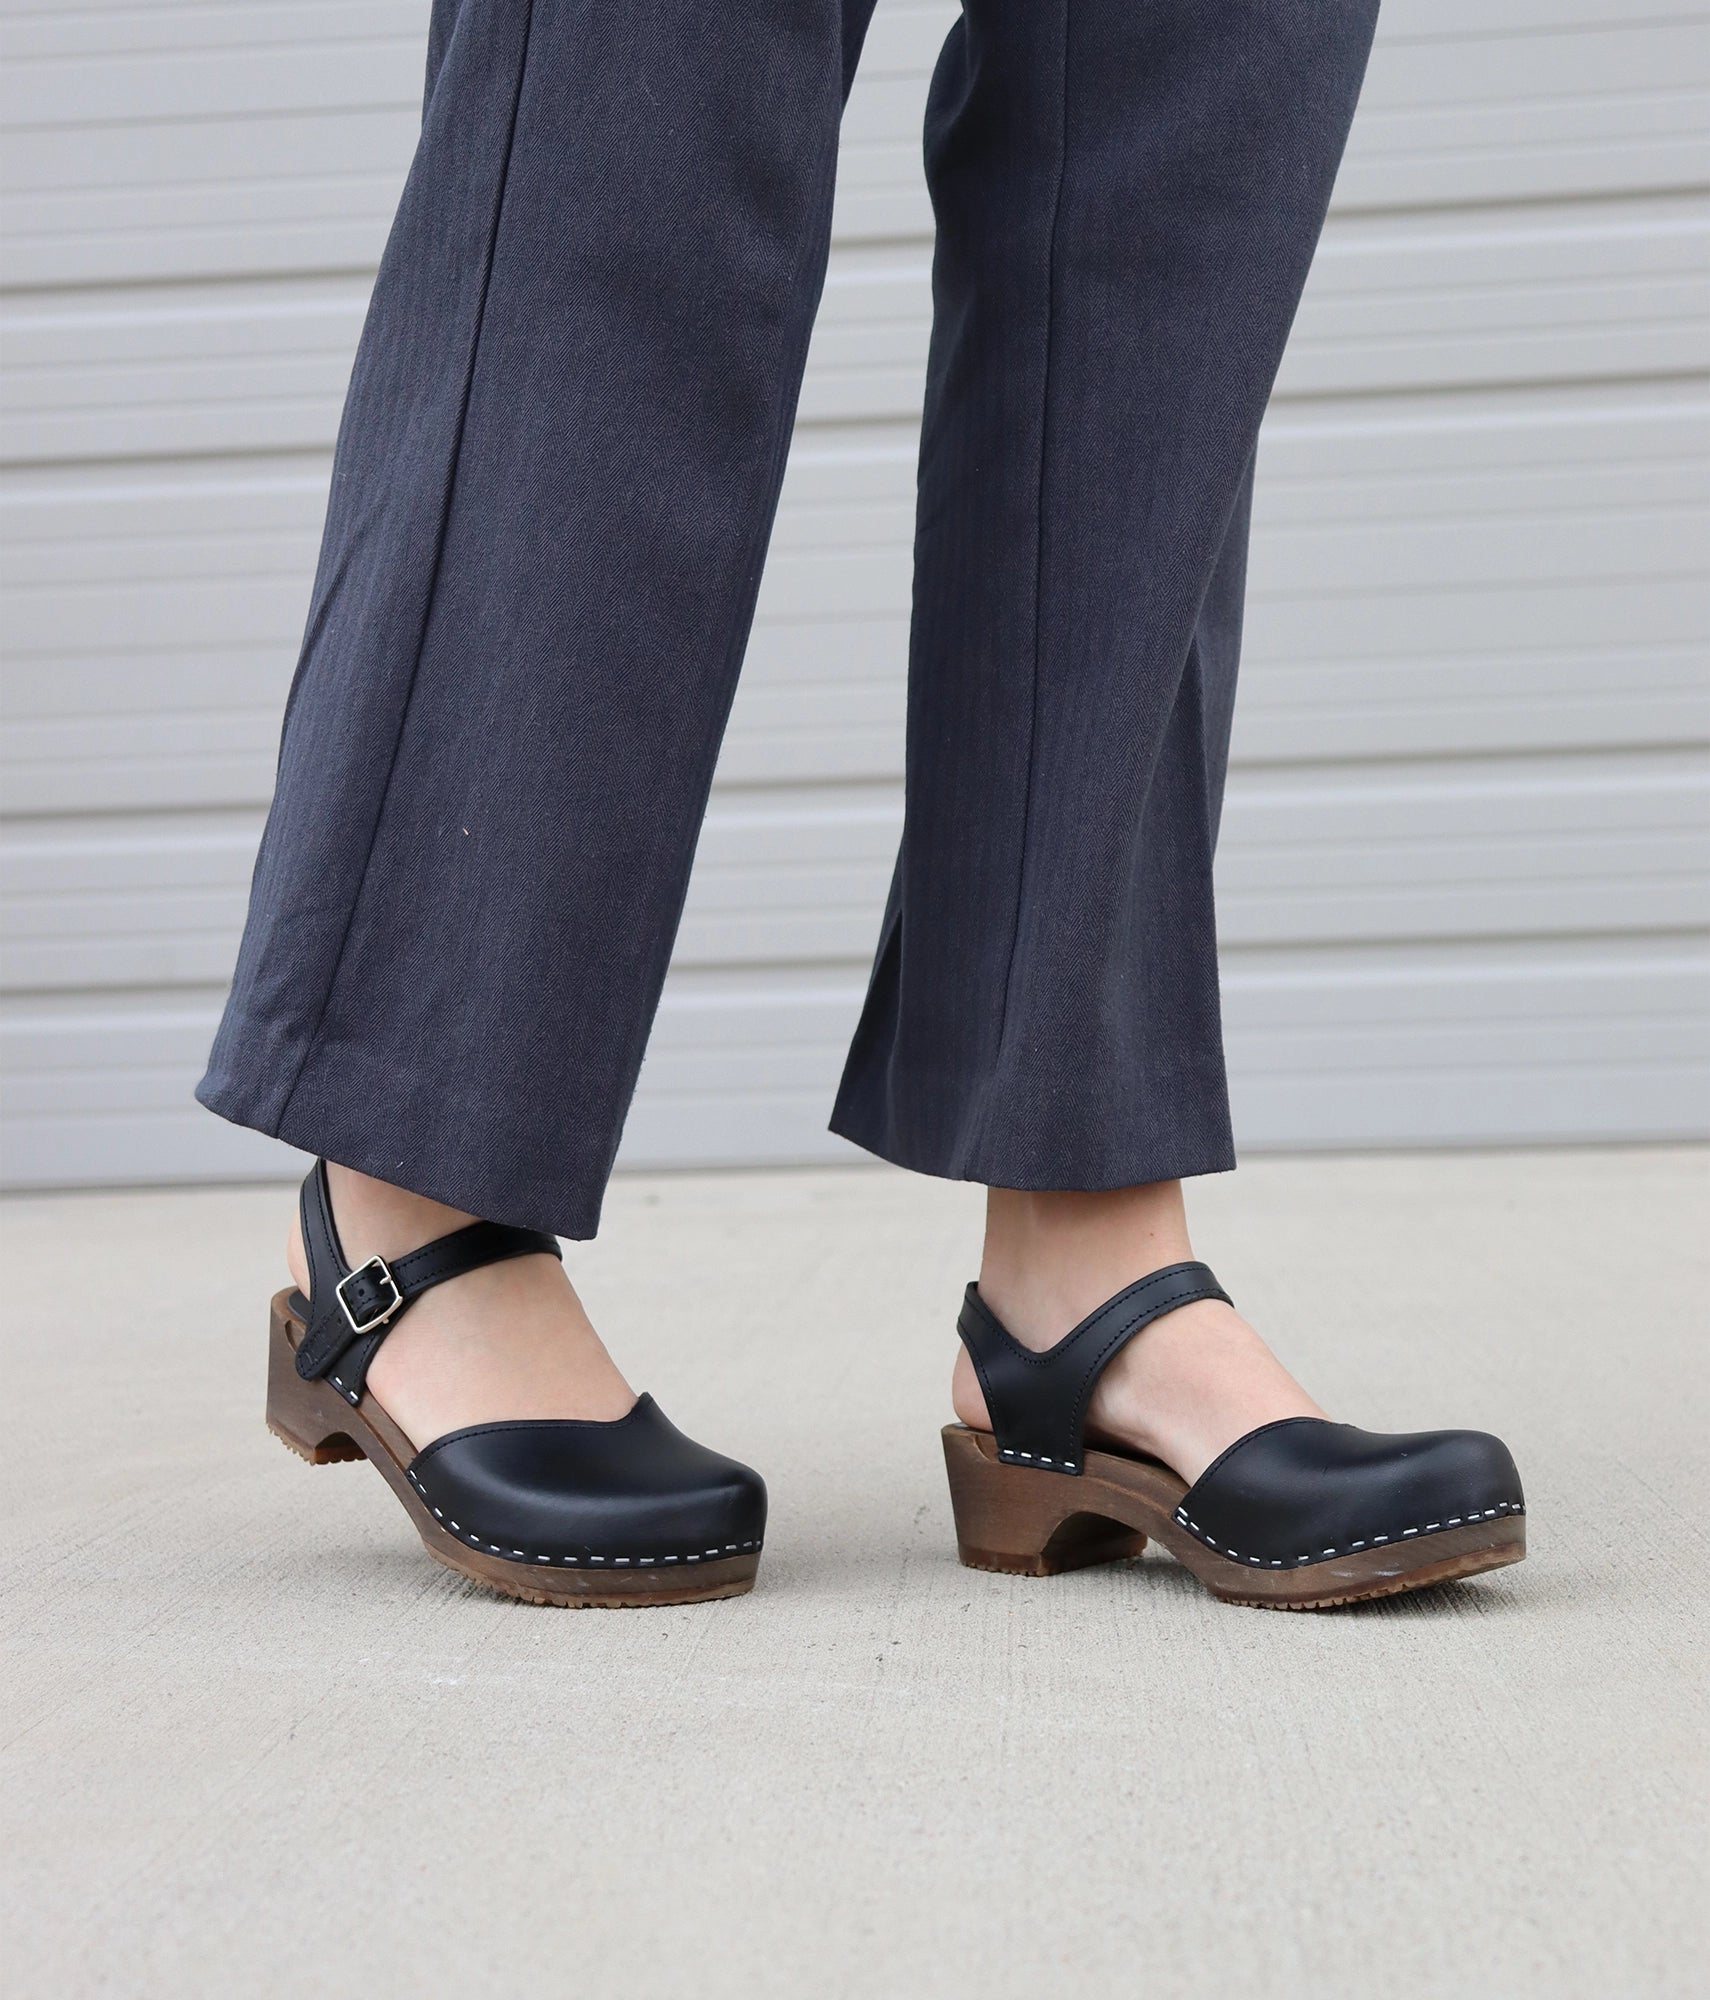 woman wearing grey dress pants and classic low heeled closed-toe sandal in black vegetable tanned leather stapled on a dark wooden base